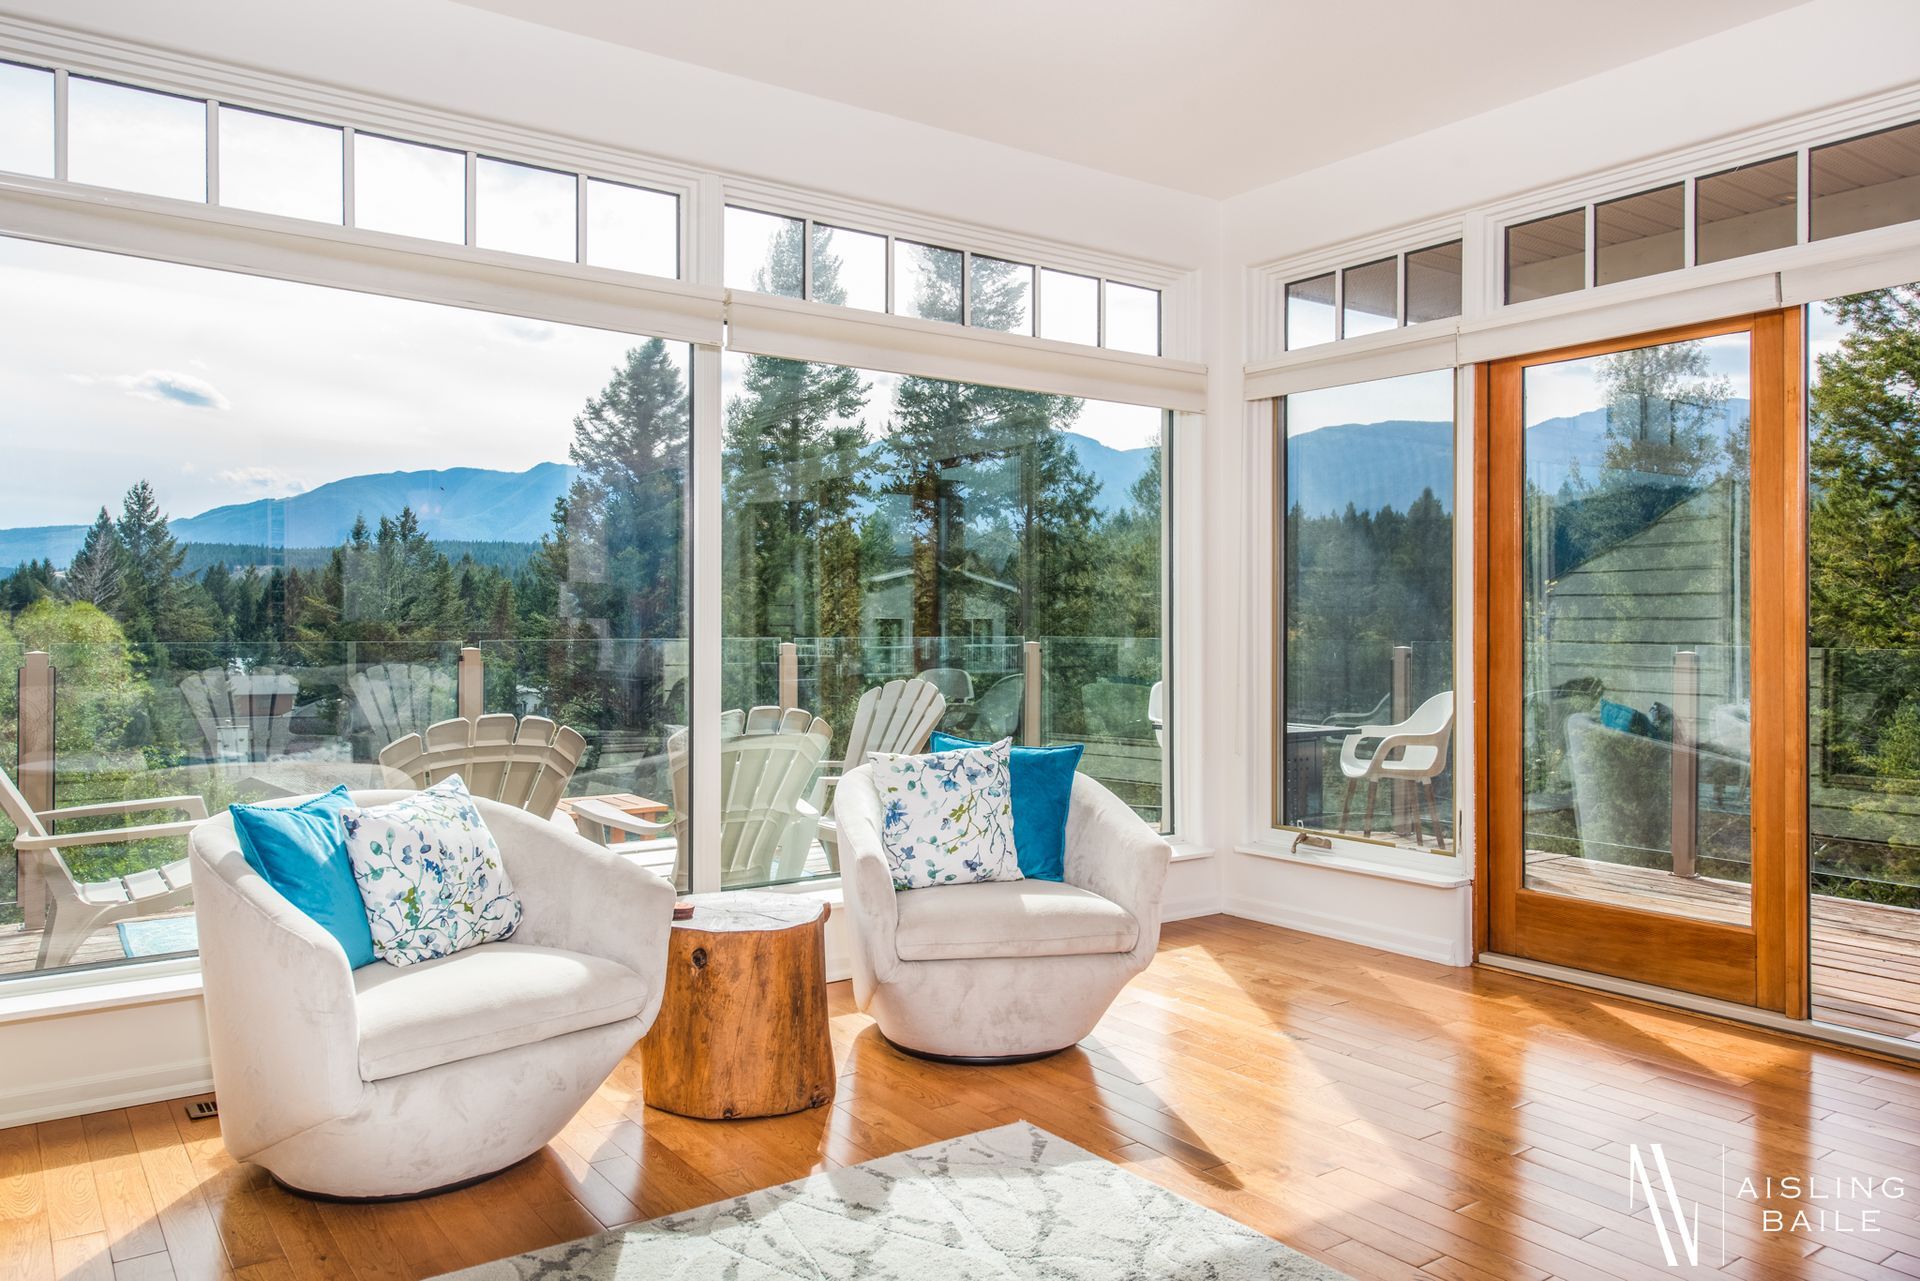 Living room views of Central Elegance, an Invermere BC Vacation Rental hosted by Aisling Baile Property Management.